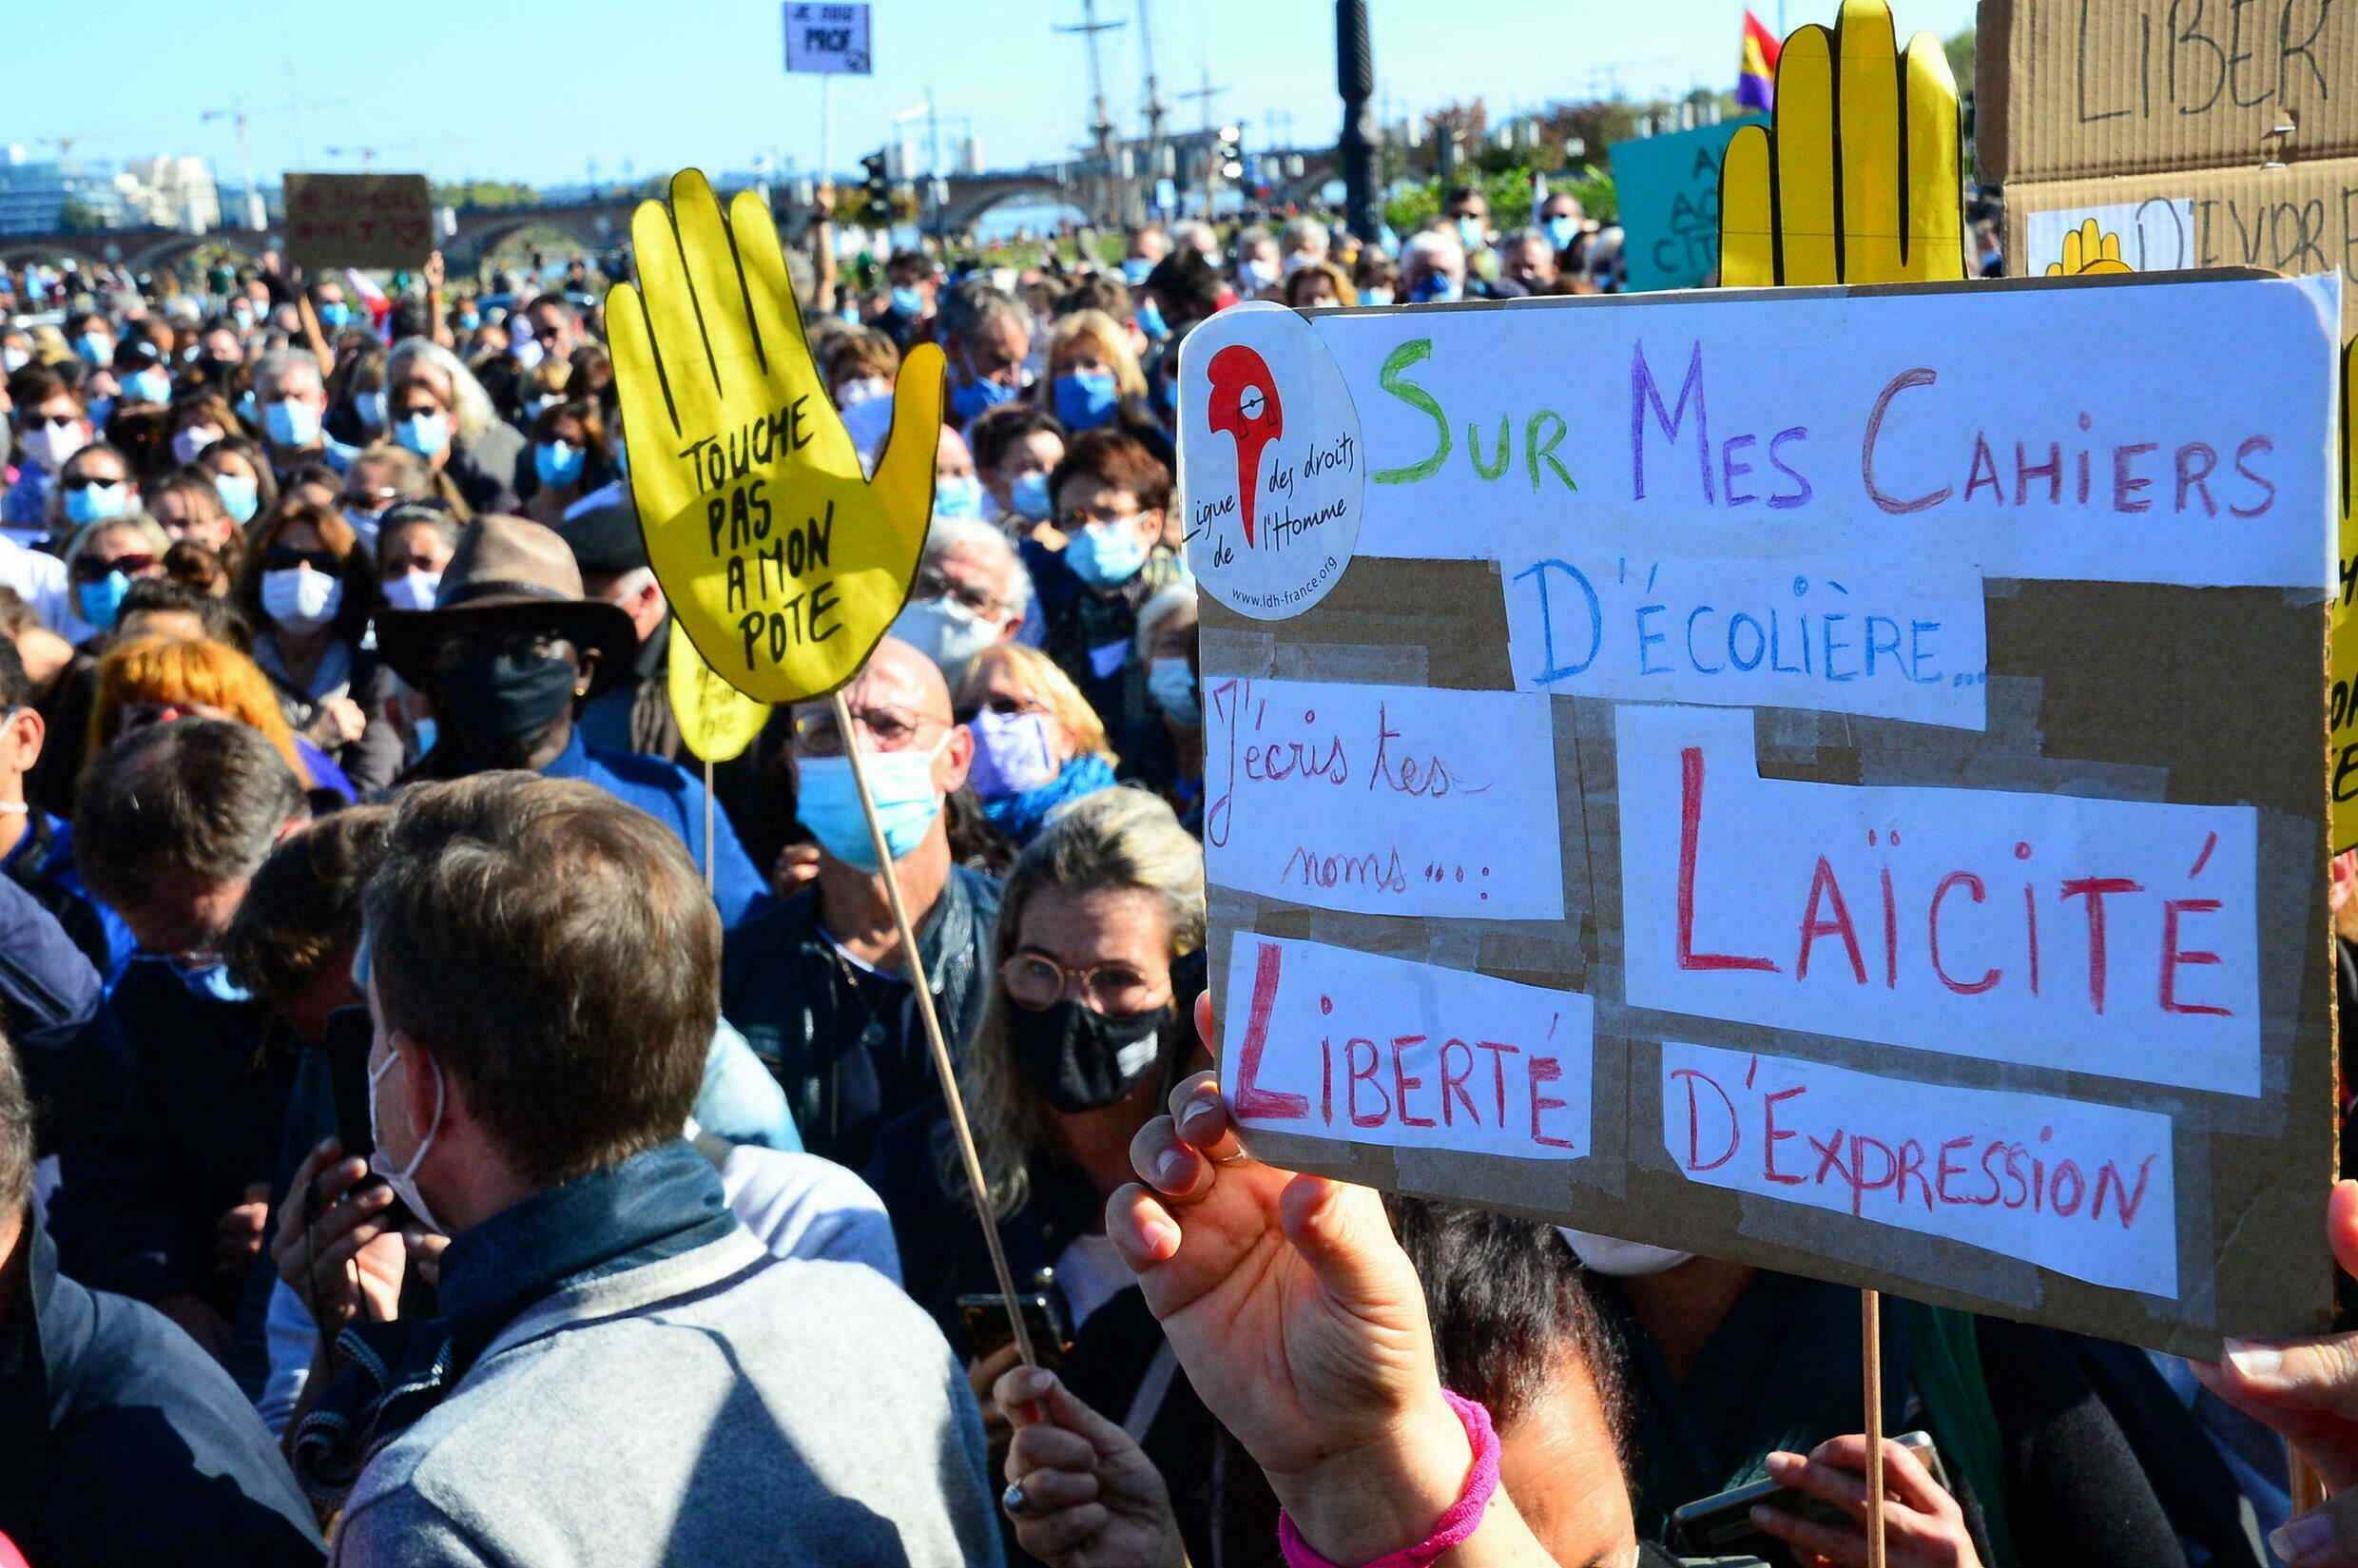 People display placards in support of laïcité, the French form of secularism designed to keep religion out of politics and education, at a demonstration in honour of Samuel Paty in Bordeaux on October 18, 2020.